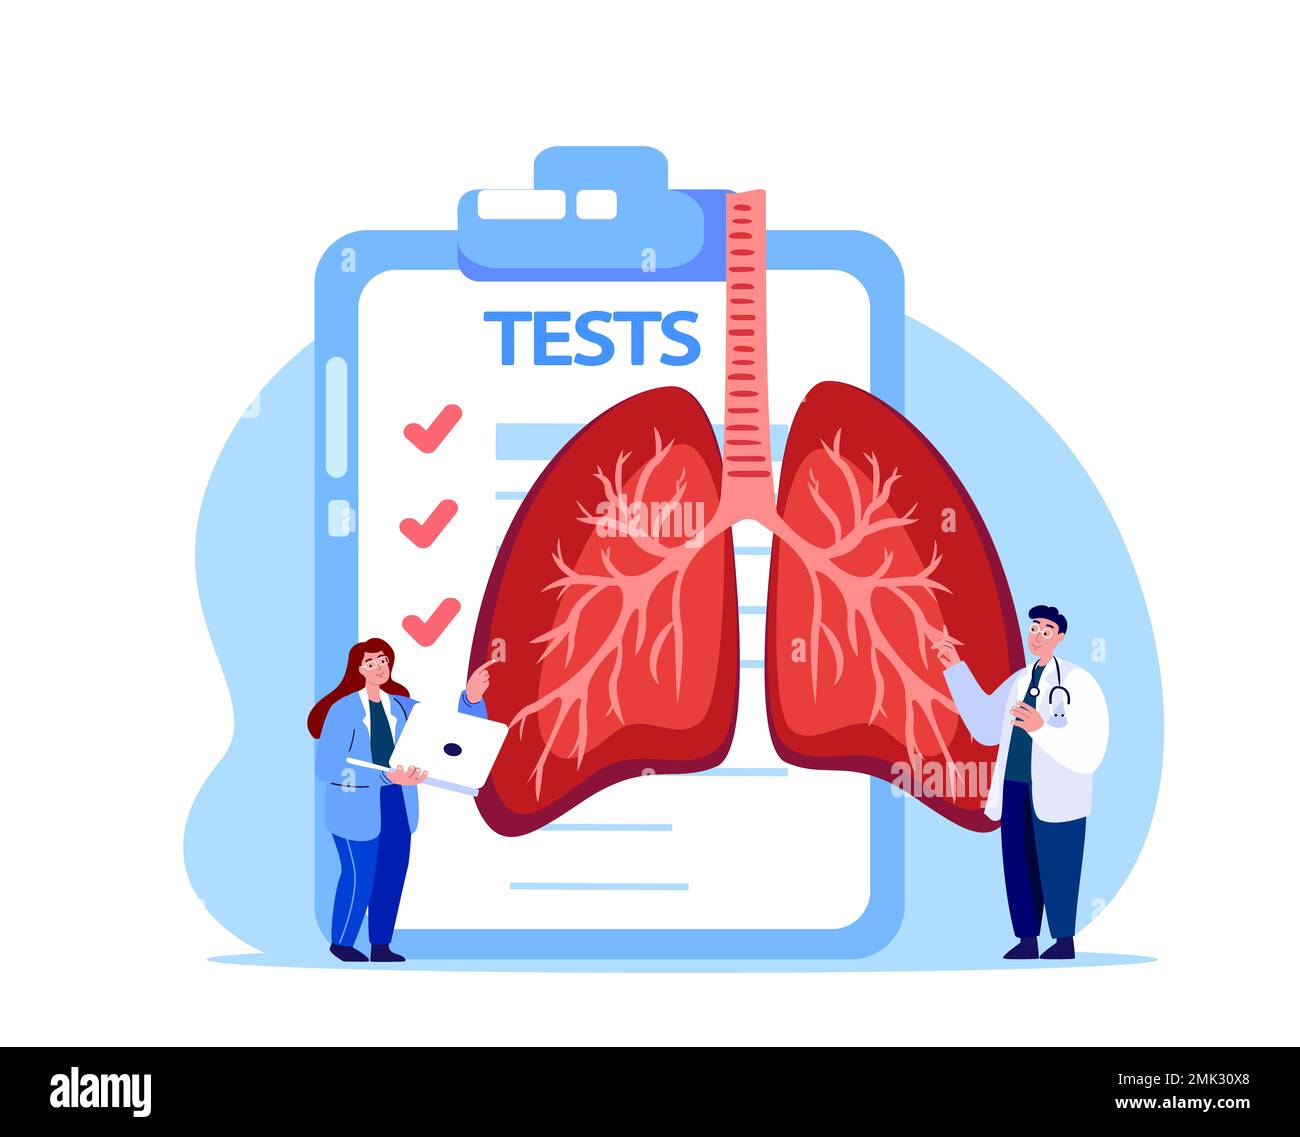 Pulmonologist Virologist Scientist Doctor Examine Tests,Analysis,Magnetic Resonance Imagine.Lungs,Trachea,Bronchi Research.Labolatory Clinical Investi Stock Photo